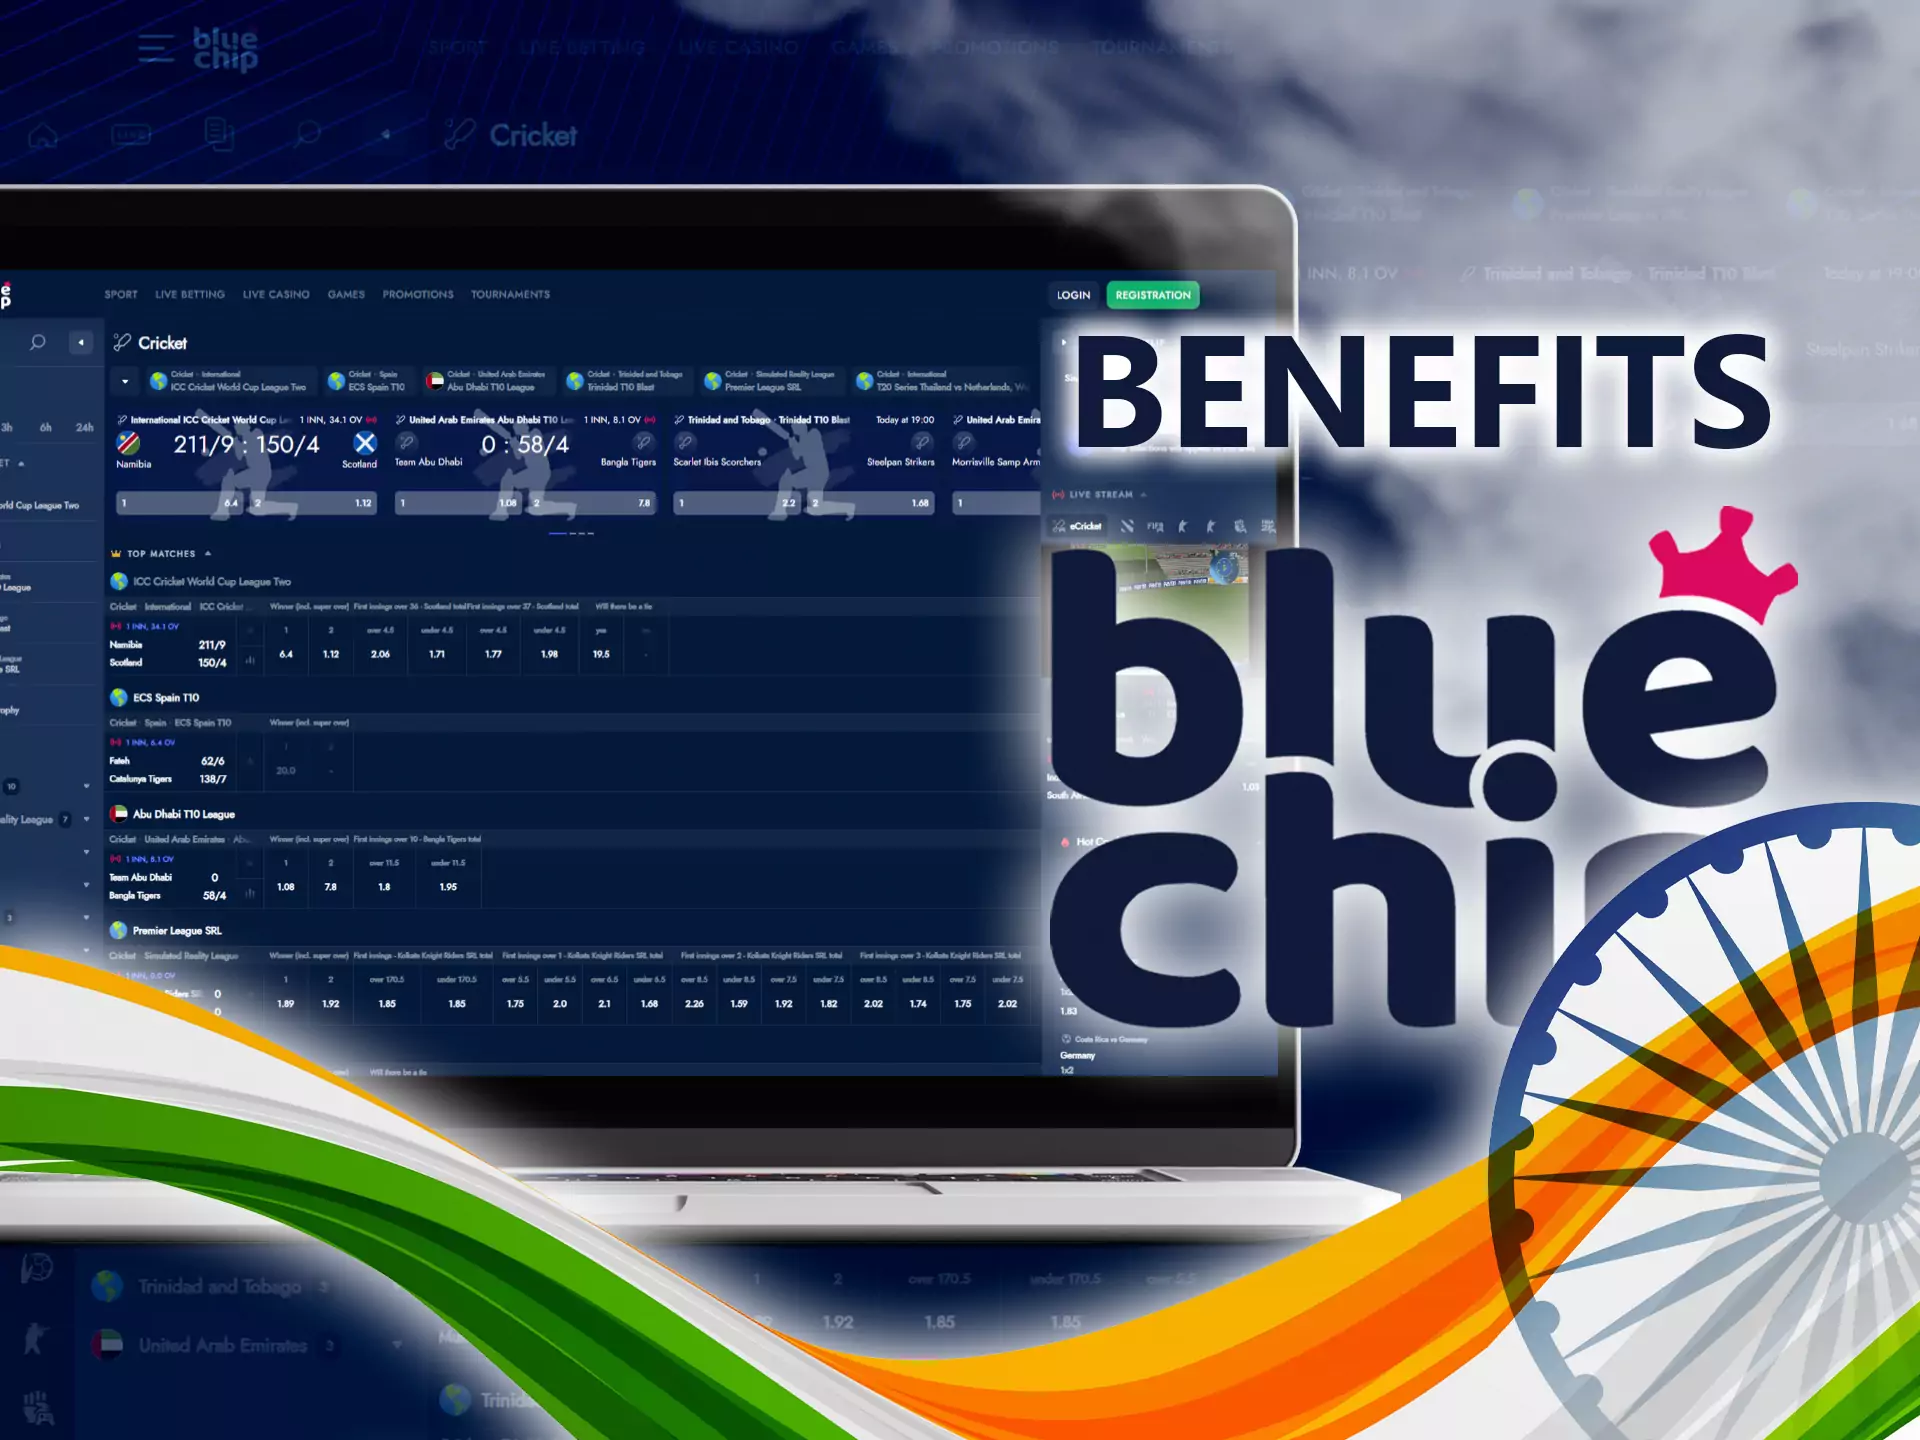 Indian users prefer Bluechip for its benefits.